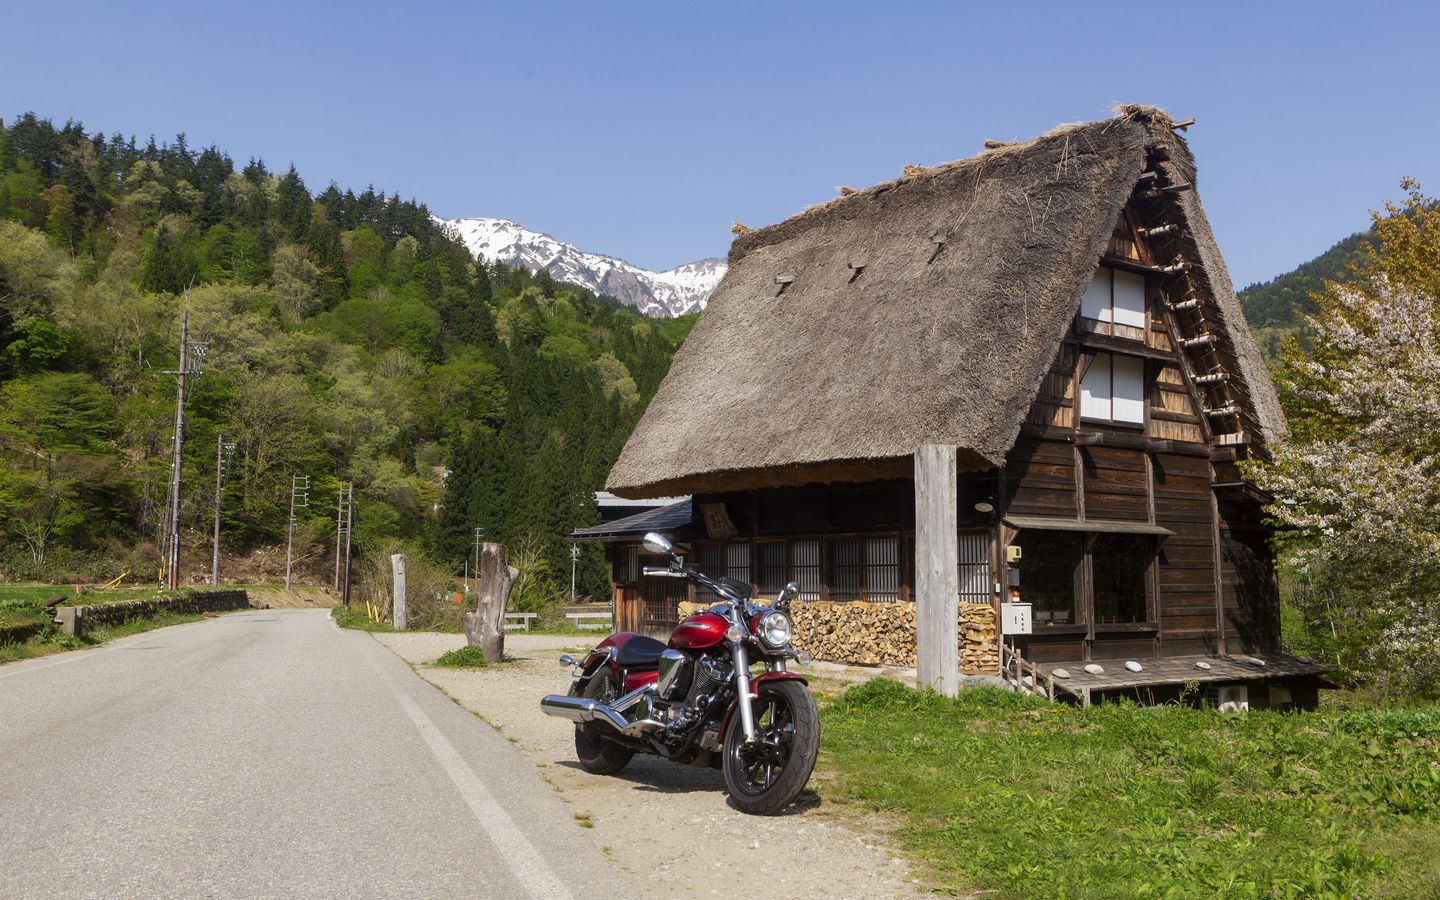 1440x900 Wallpaper motorcycle, red, house, trees, mountain